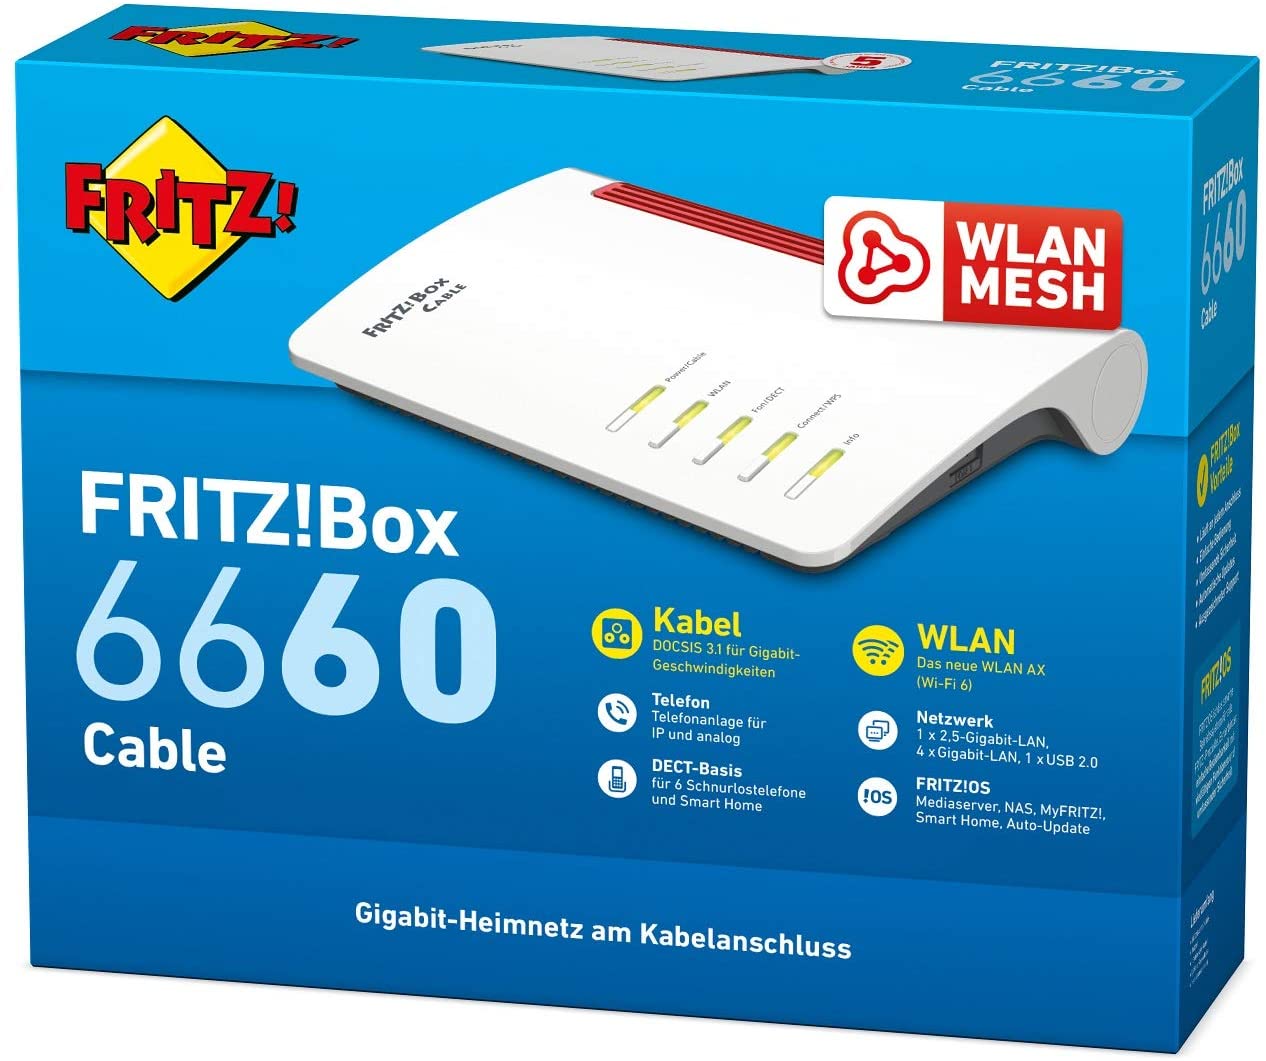 AVM FRITZ!Box 6660 Cable - 20002910